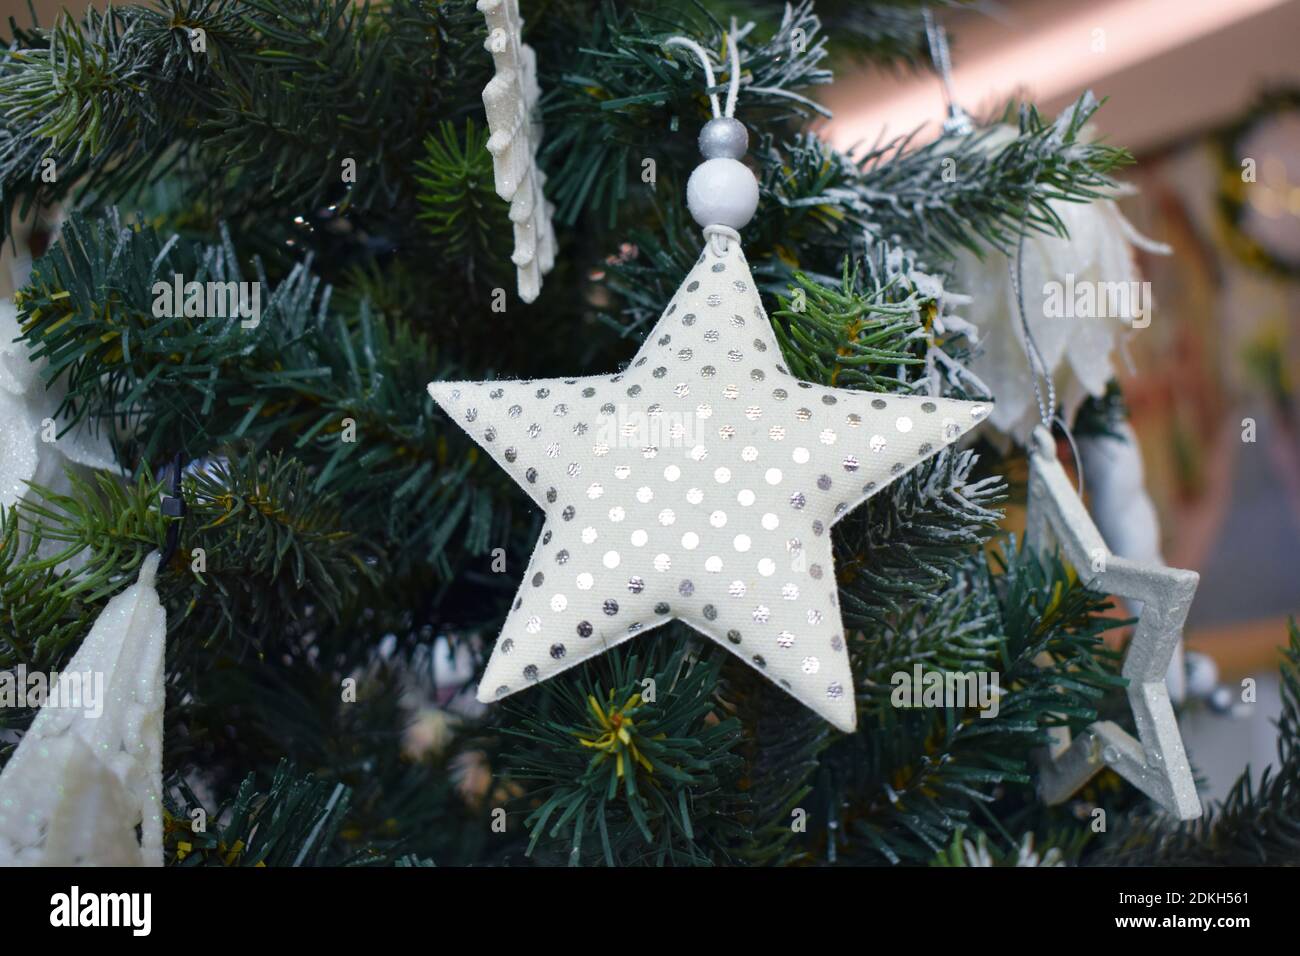 Christmas tree with decorations, balls, stars and garlands. Christmas background Stock Photo